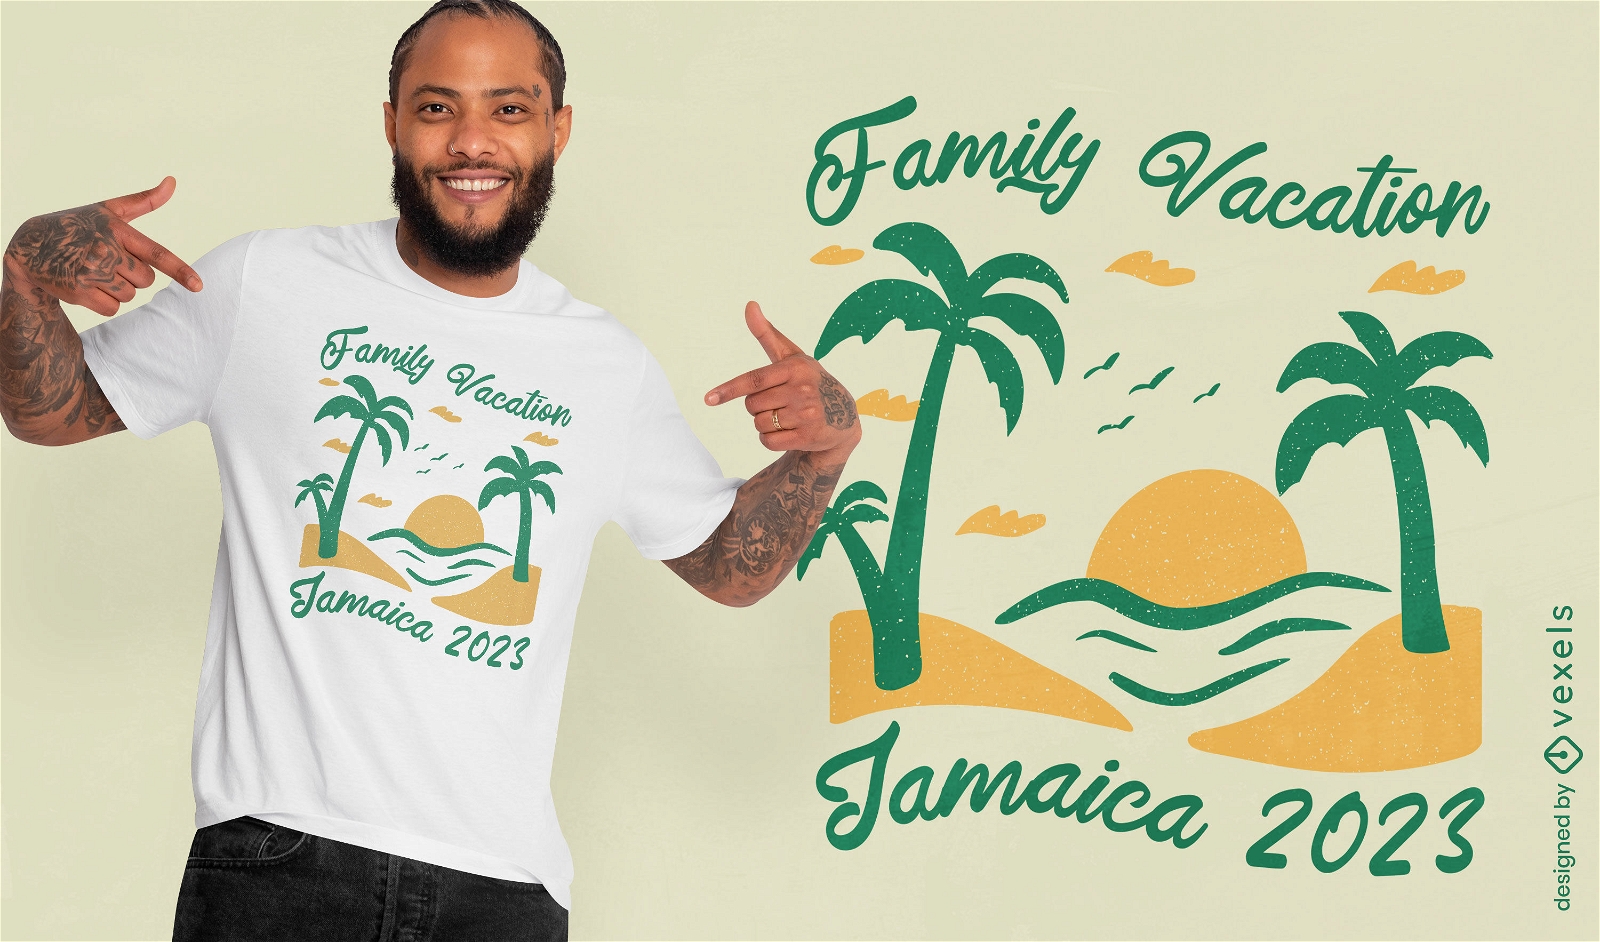 Family vacation t-shirt design